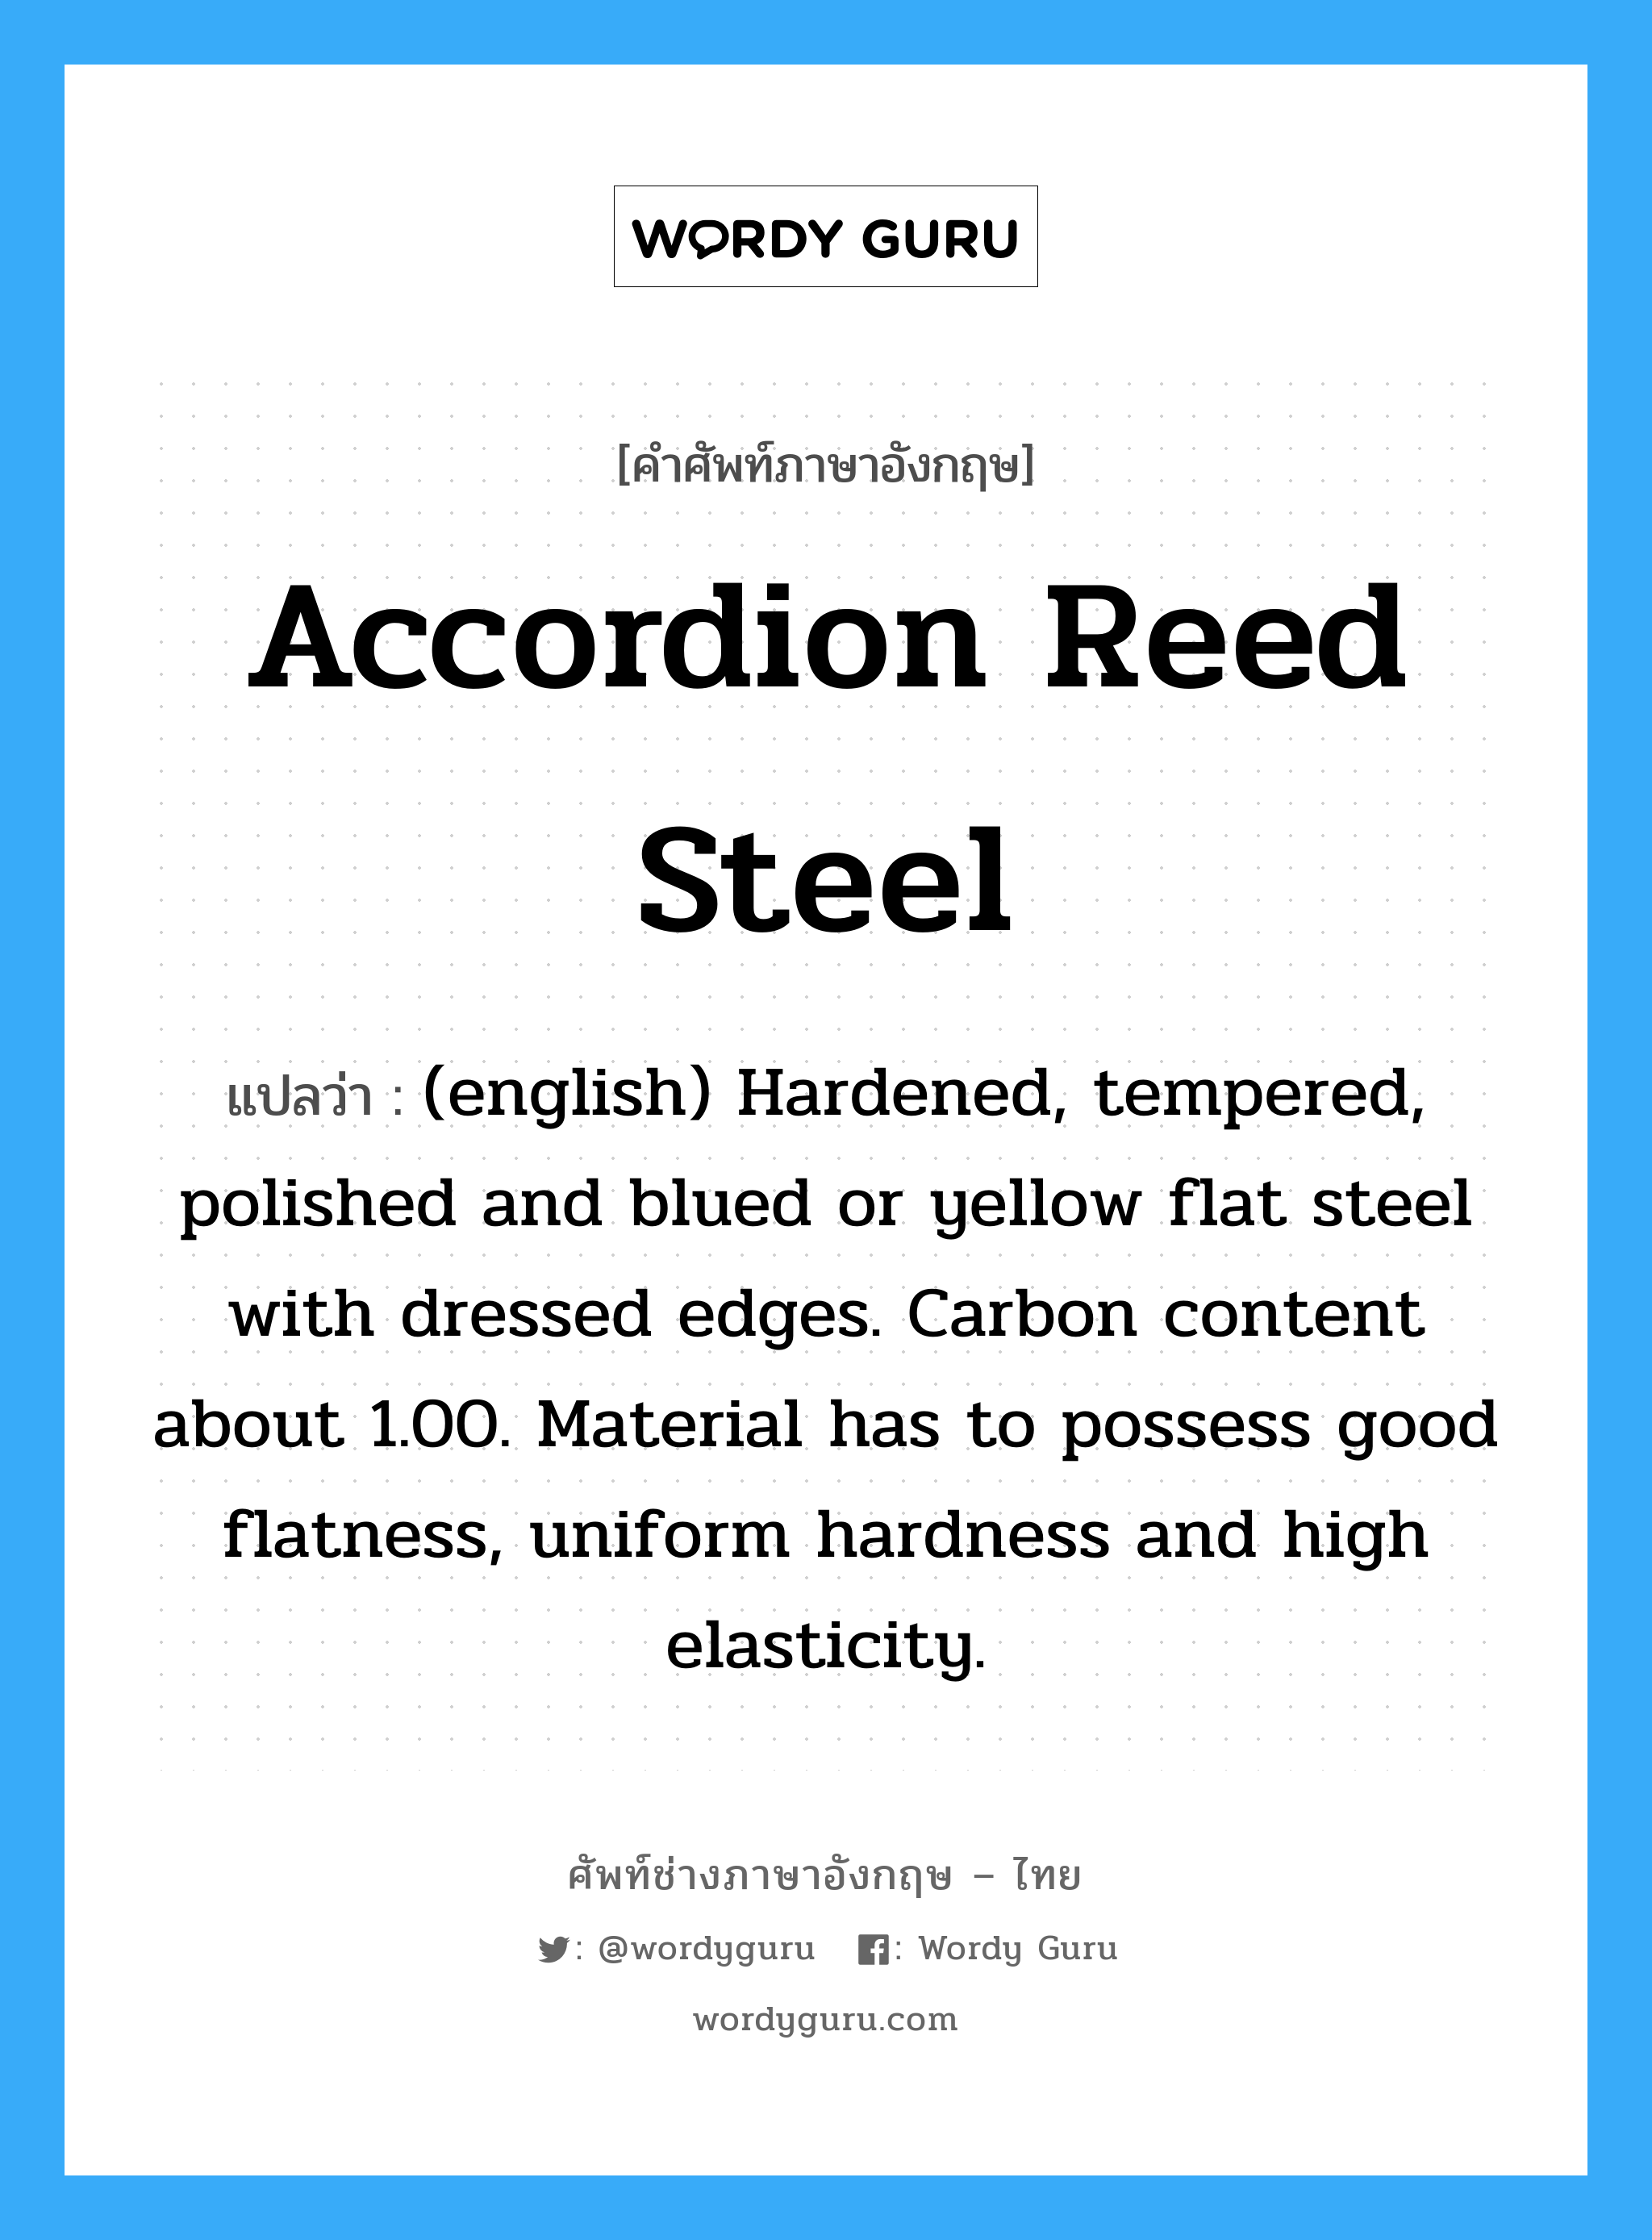 Accordion Reed Steel แปลว่า?, คำศัพท์ช่างภาษาอังกฤษ - ไทย Accordion Reed Steel คำศัพท์ภาษาอังกฤษ Accordion Reed Steel แปลว่า (english) Hardened, tempered, polished and blued or yellow flat steel with dressed edges. Carbon content about 1.00. Material has to possess good flatness, uniform hardness and high elasticity.